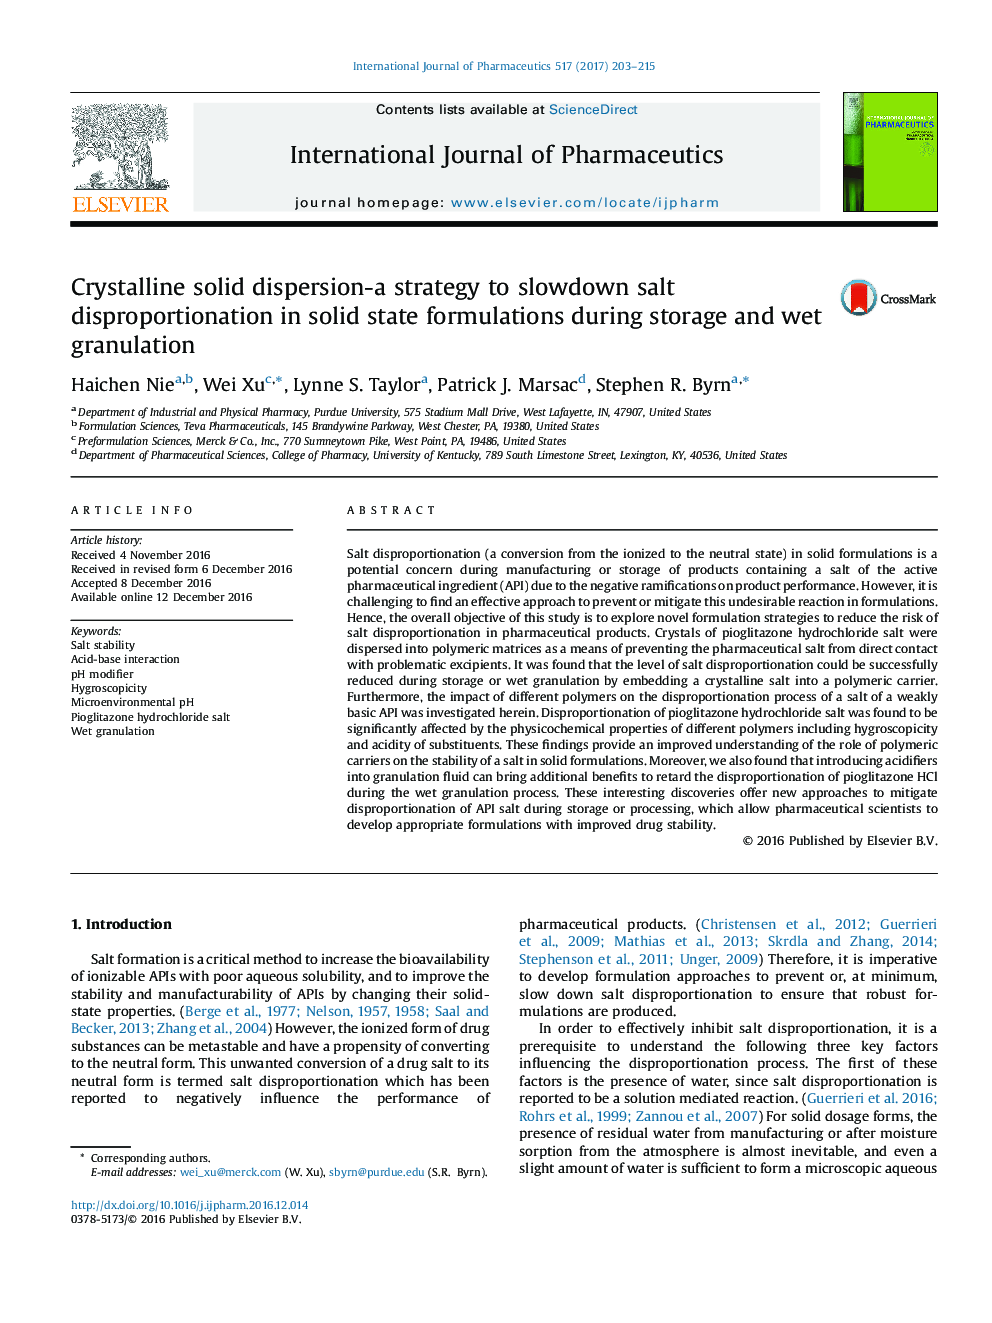 Crystalline solid dispersion-a strategy to slowdown salt disproportionation in solid state formulations during storage and wet granulation